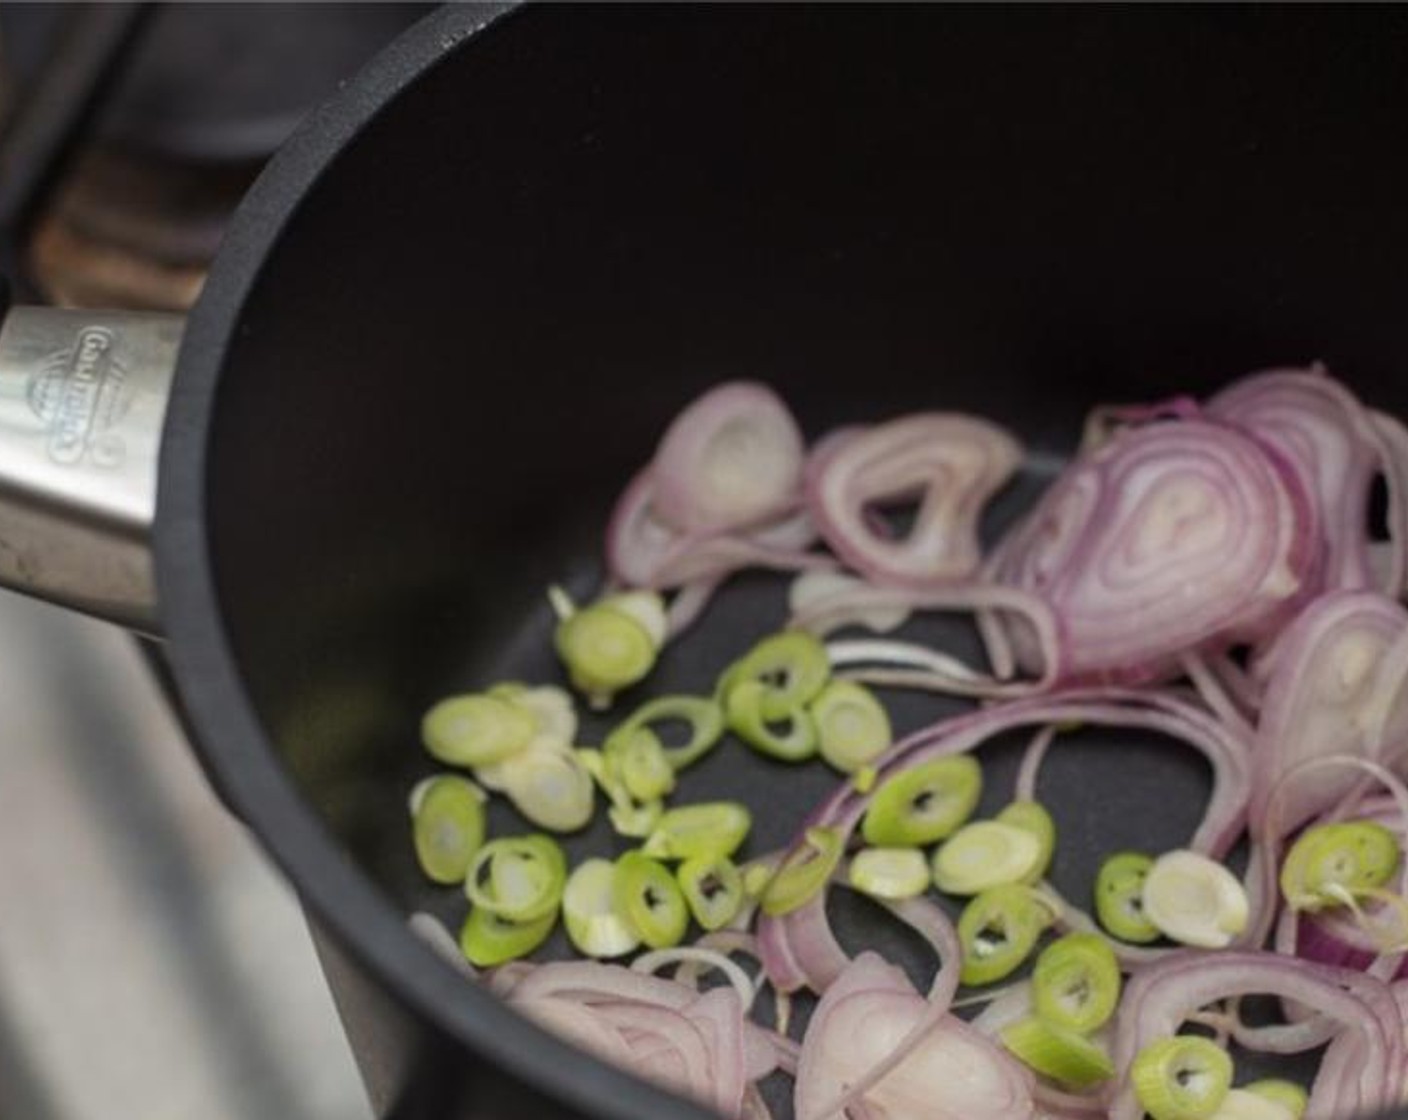 step 4 In a medium saucepan with a lid add Olive Oil (1 tsp), shallot, and spring onion whites. Place pan over medium heat, and cook, stirring intermittently, until onions turn translucent, 4-5 minutes.